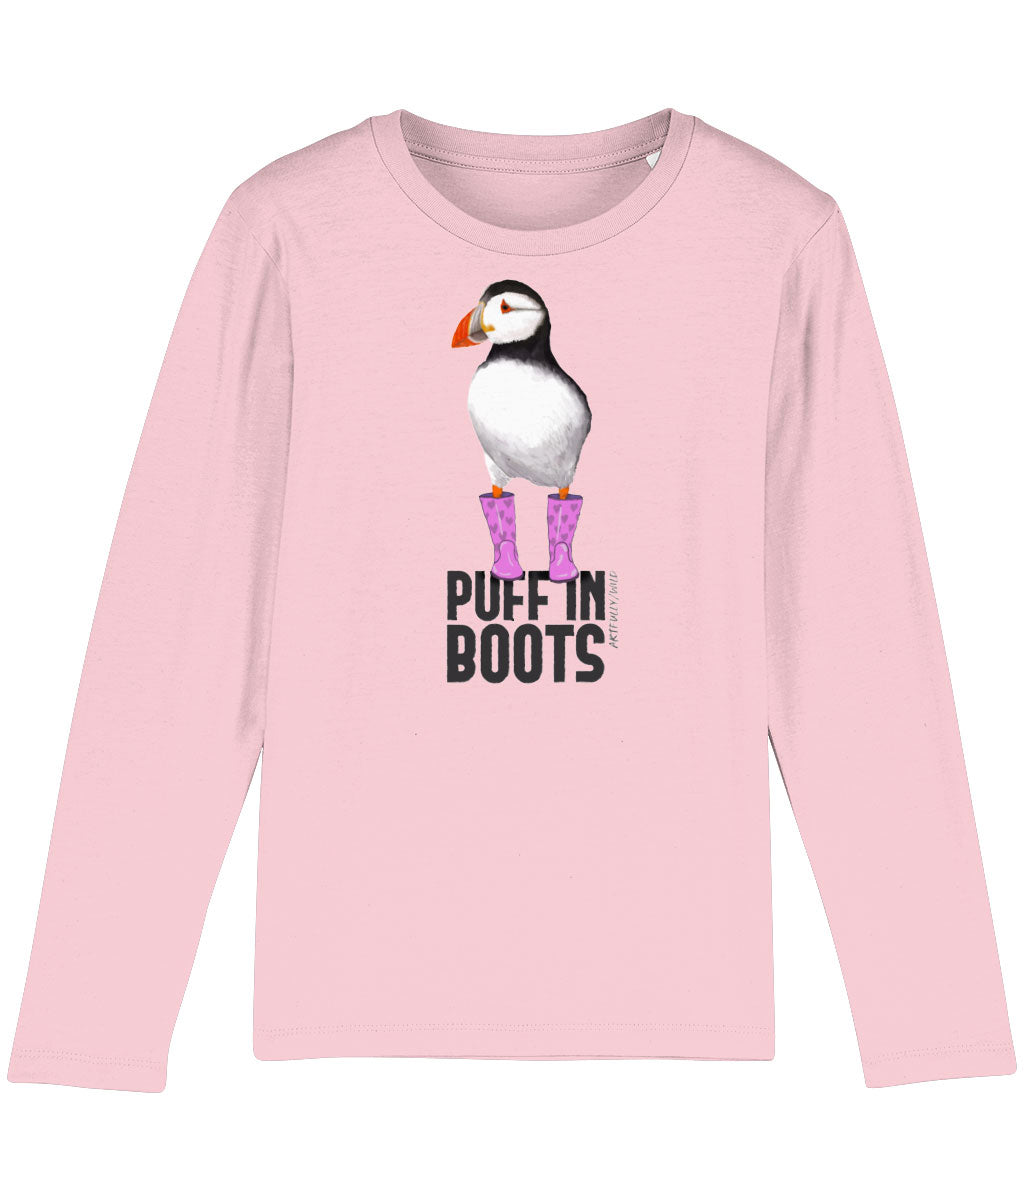 'PUFF IN PINK BOOTS' Print on Cotton Pink Organic Kids T-Shirt. Unisex/Girls/Boys. Sustainable Clothing. Original Painted Illustration by Artfully/Wild. Printed with water-based inks.